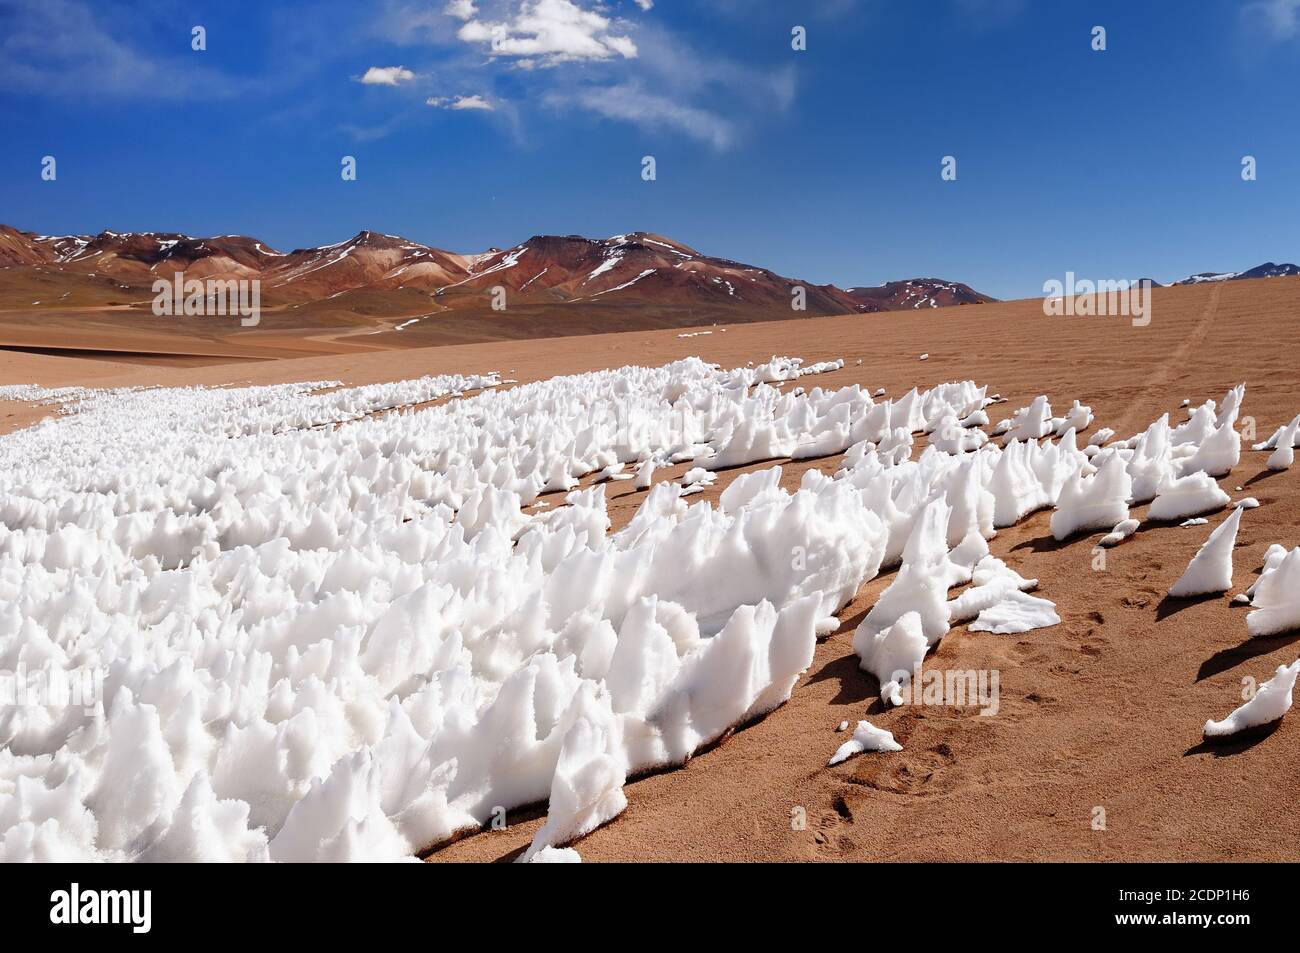 South America - The surreal landscape in the Eduardo Avaroa National Reserve of Andean Fauna near Chilean border. The picture sonw on the desert Stock Photo